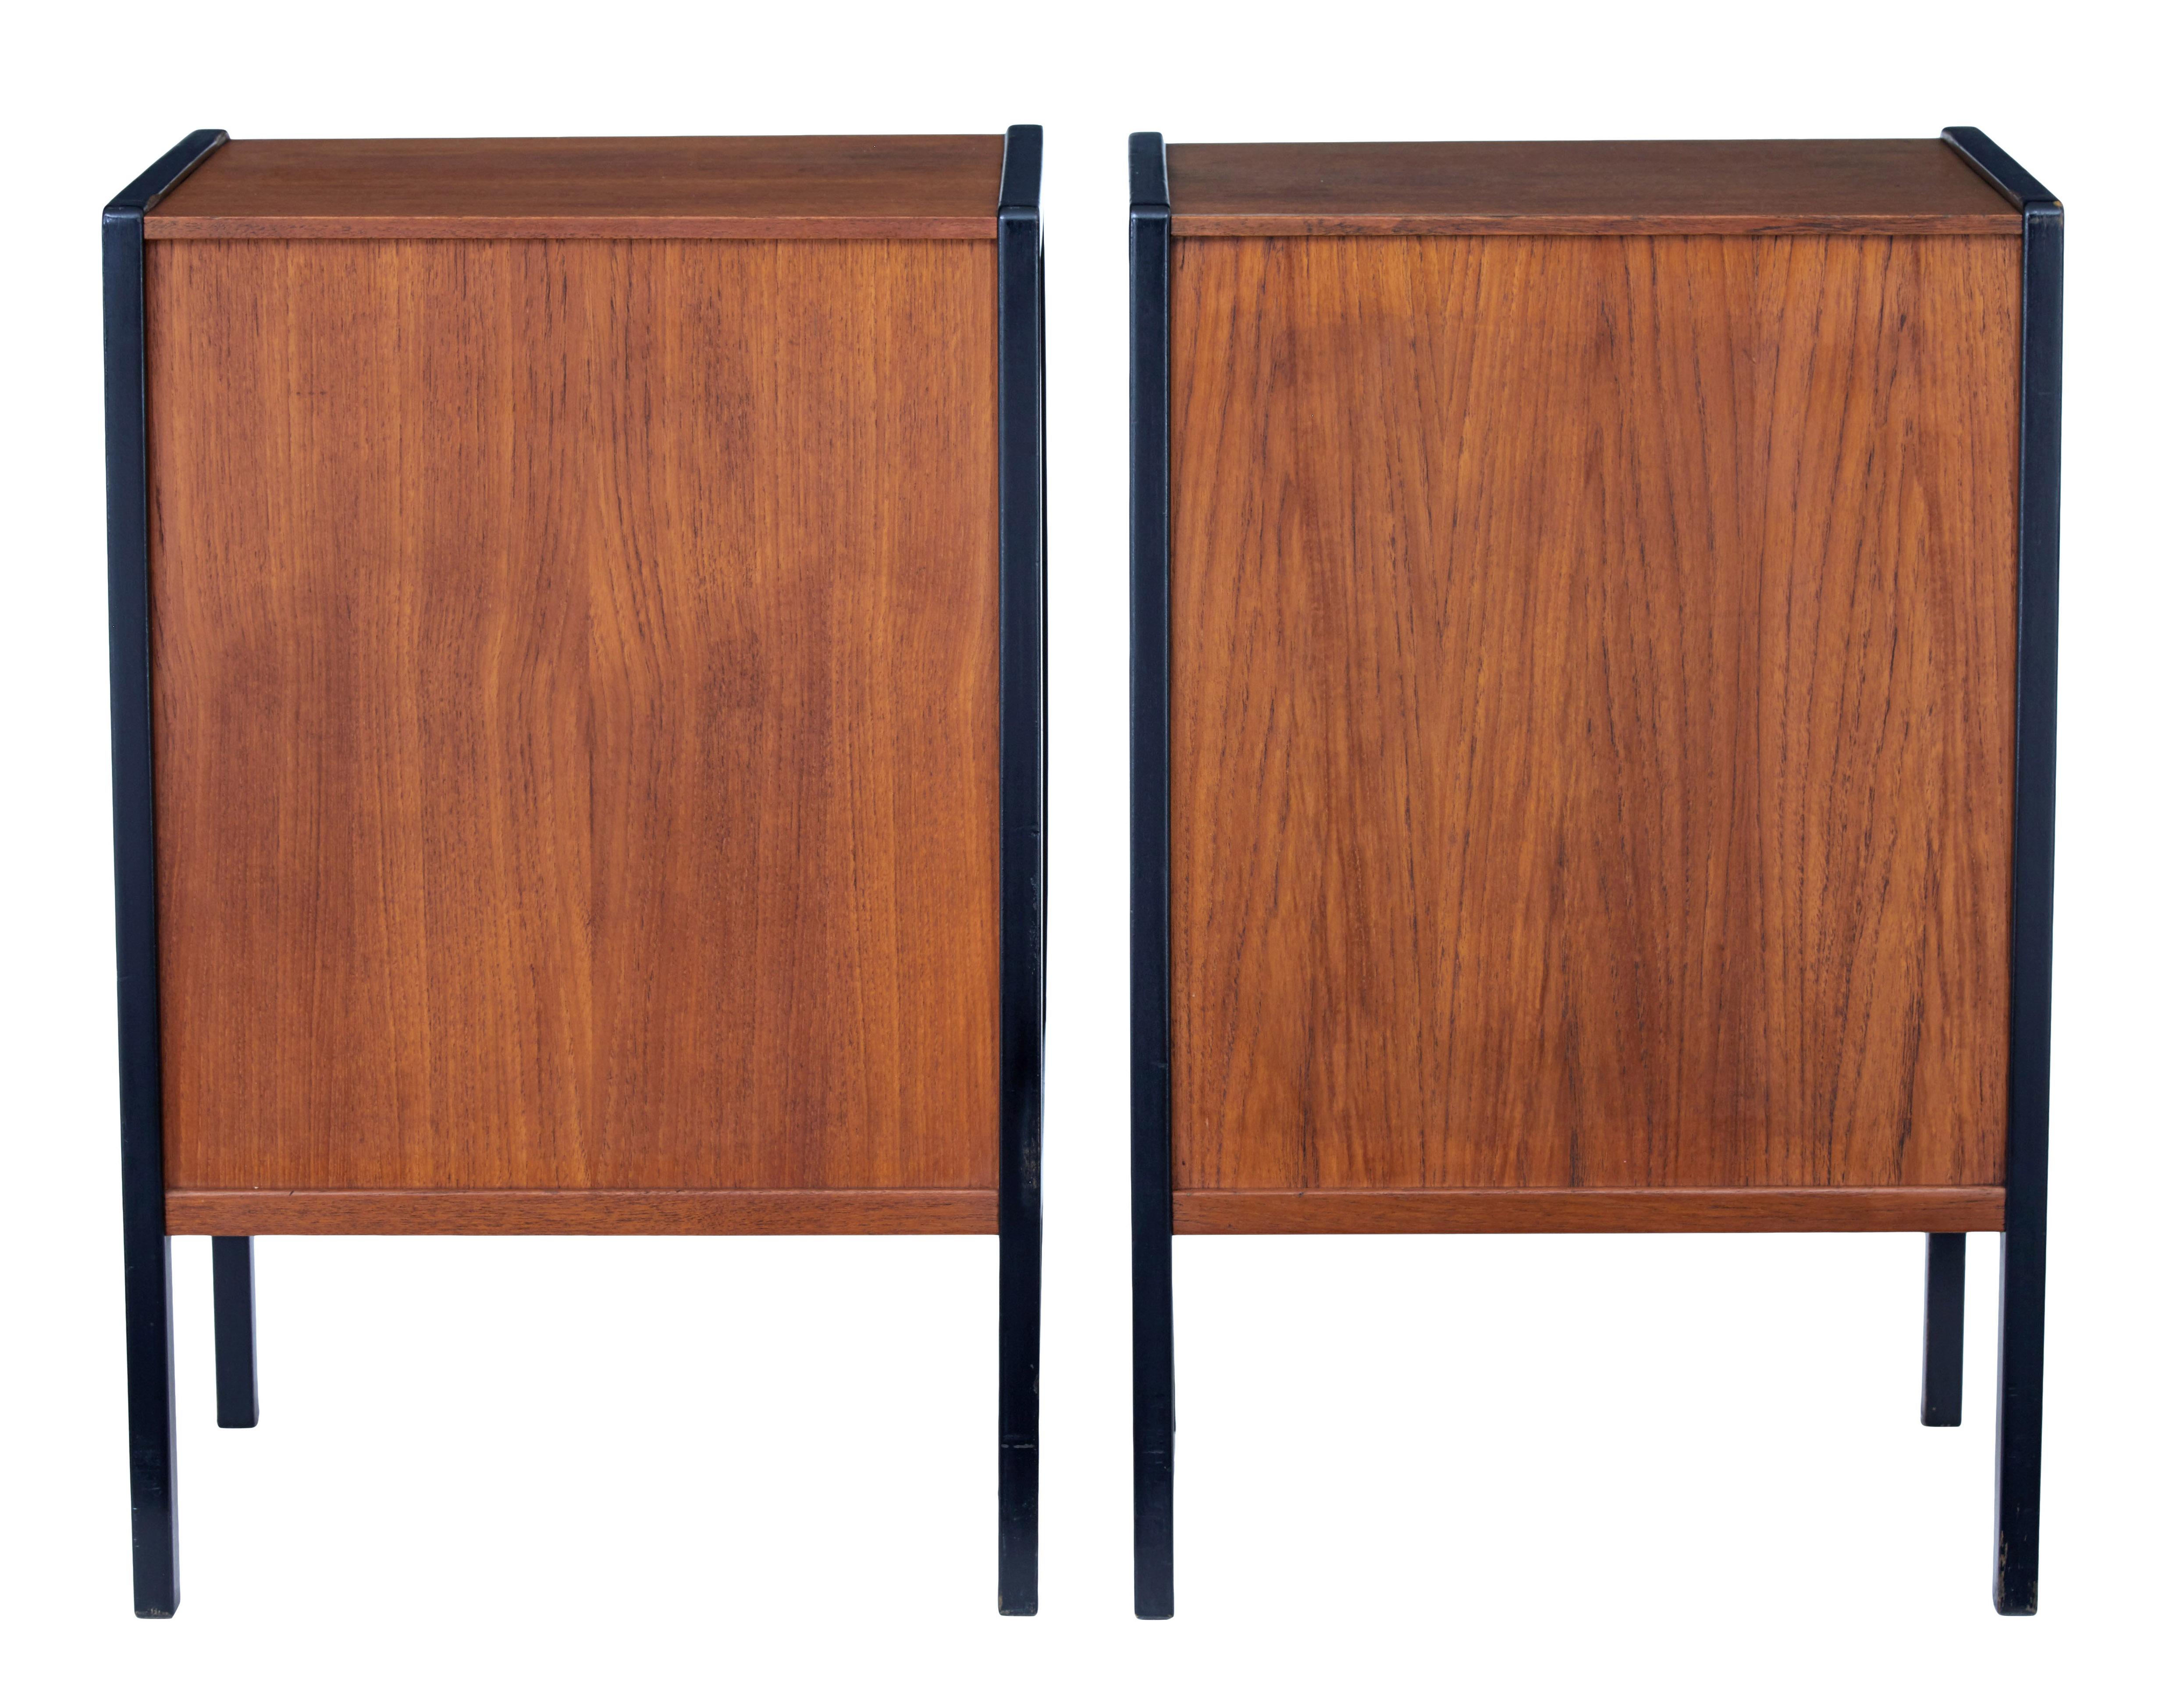 Swedish Pair of Mid-20th Century Scandinavian Teak Bedside Chests by Bodafors